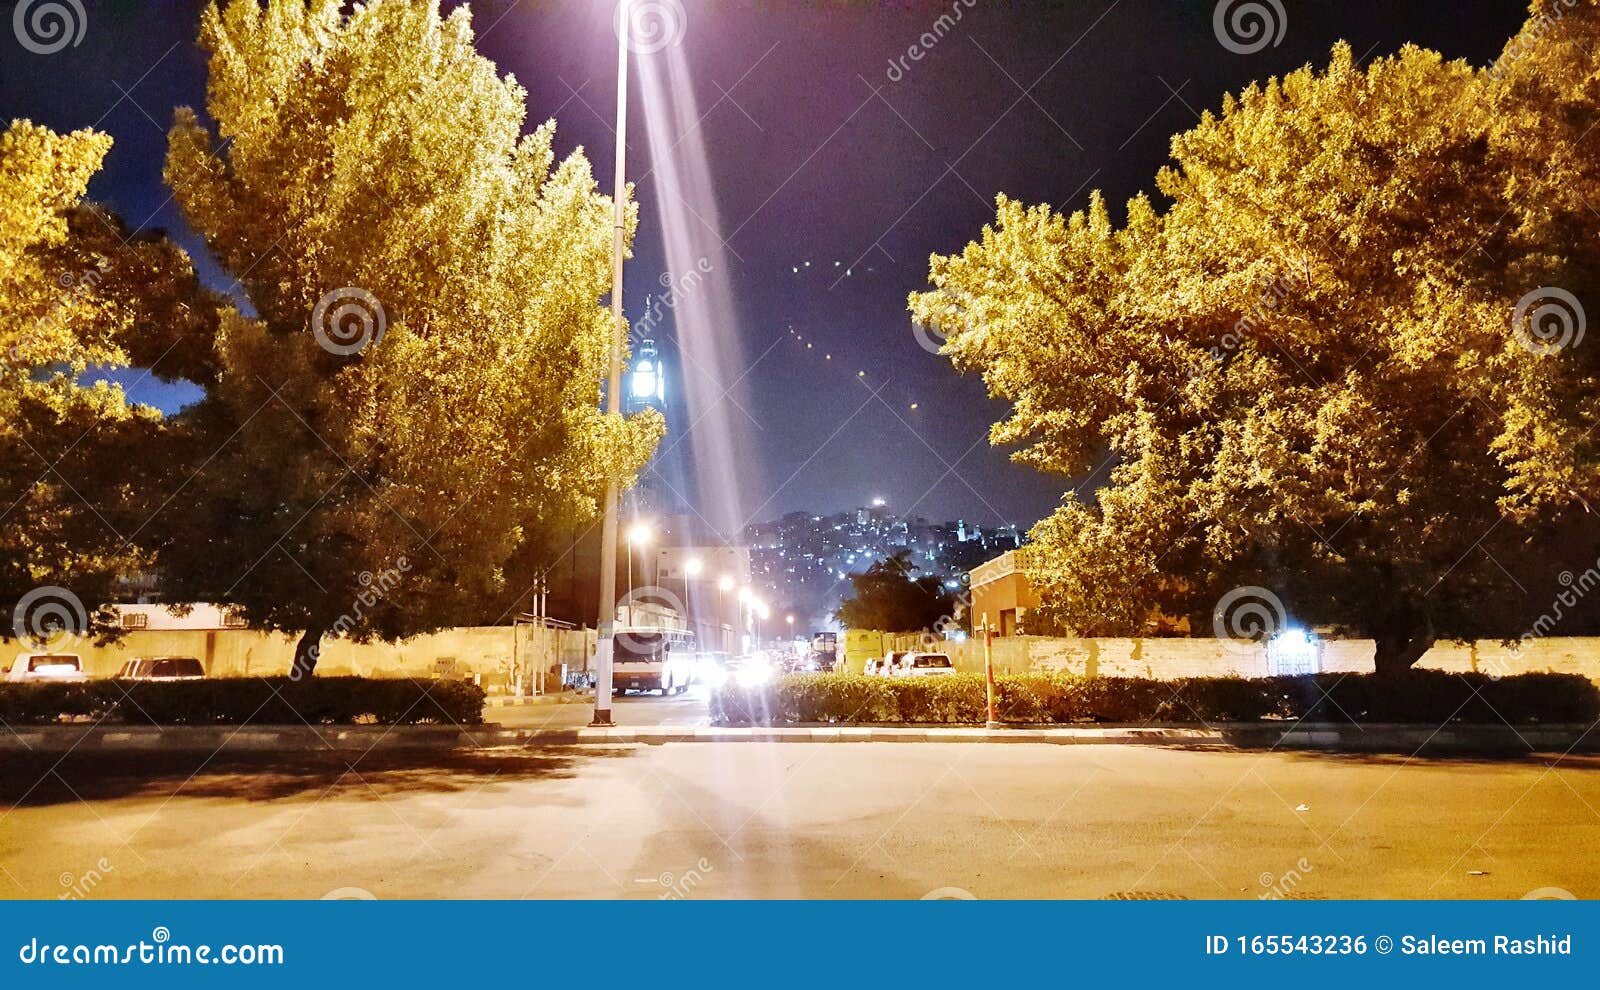 Abstract Art Public Place Night View Stock Photo - Image of place,  vehicles: 165543236